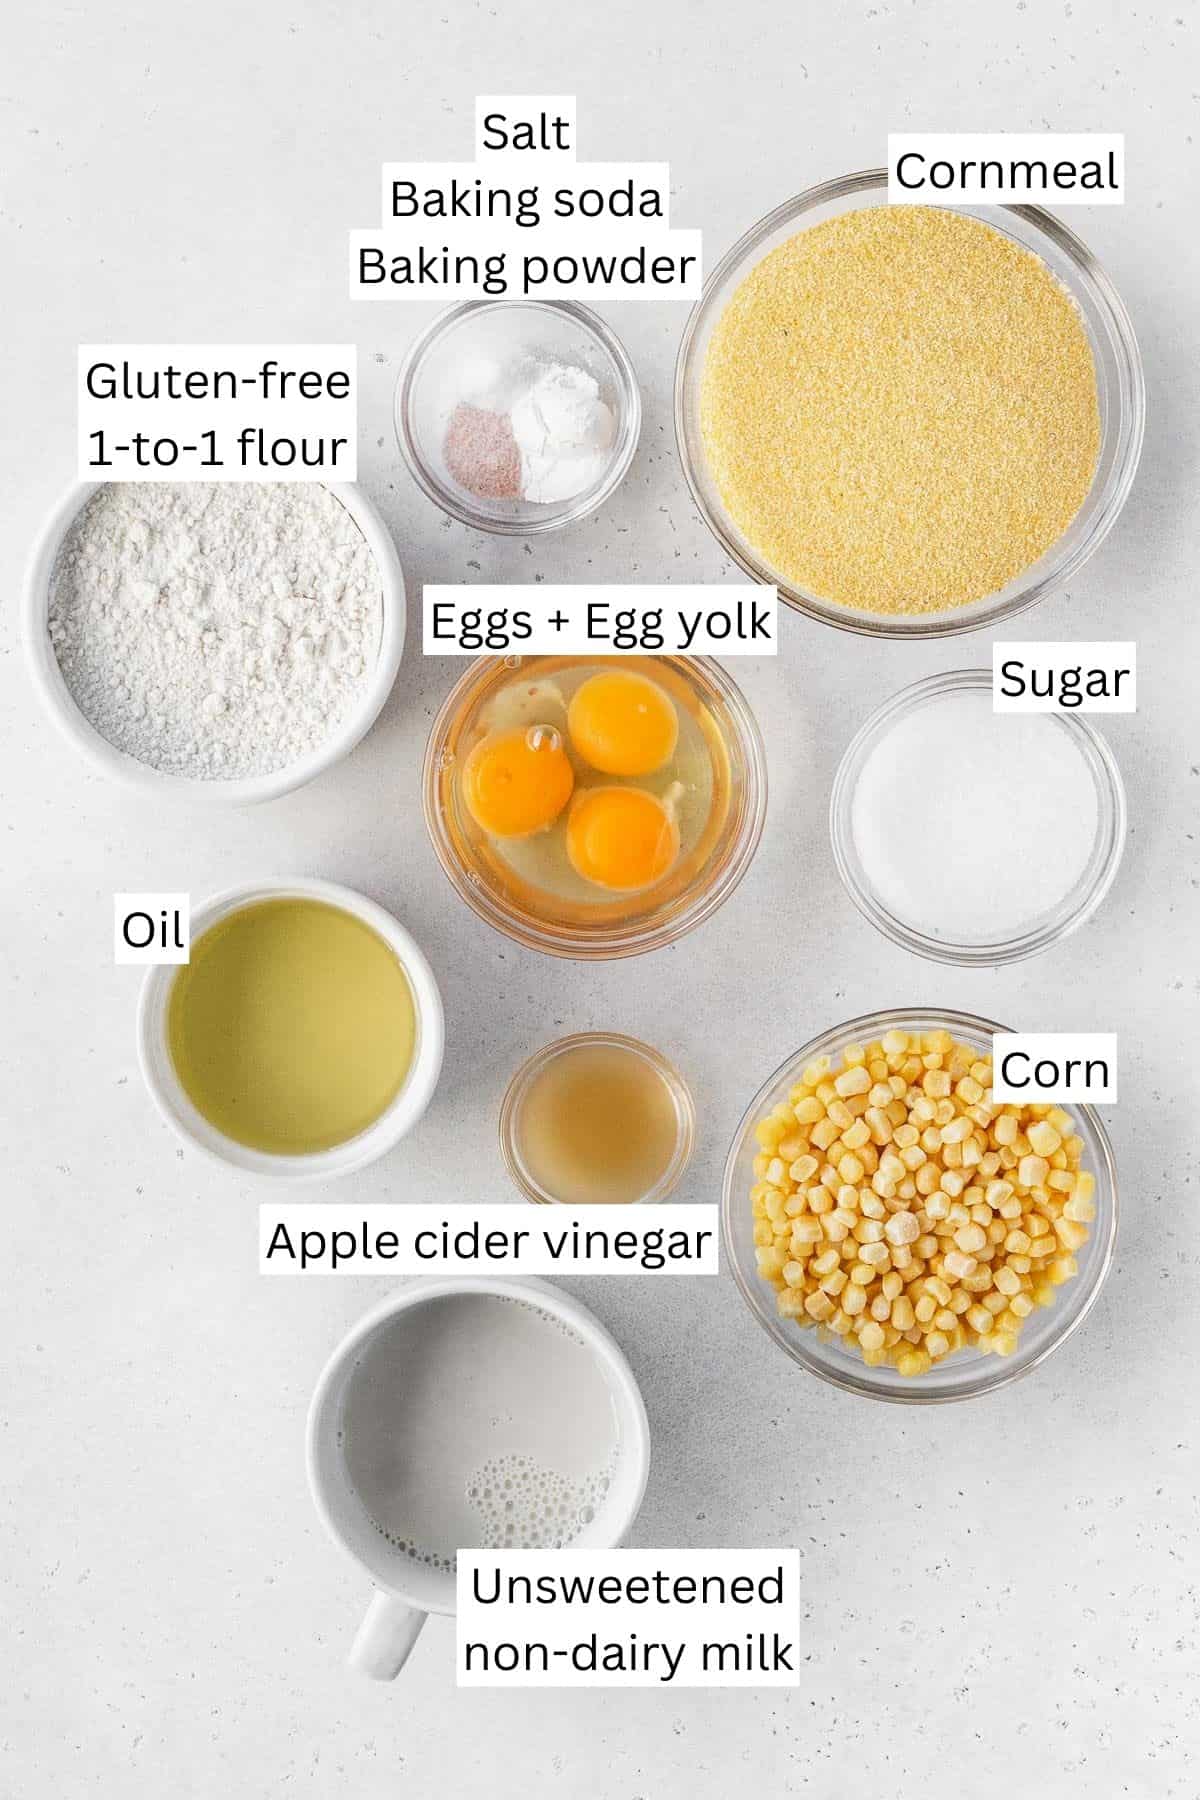 Ingredients for making dairy-free gluten-free cornbread measured out into bowls on a white table with text overlay.